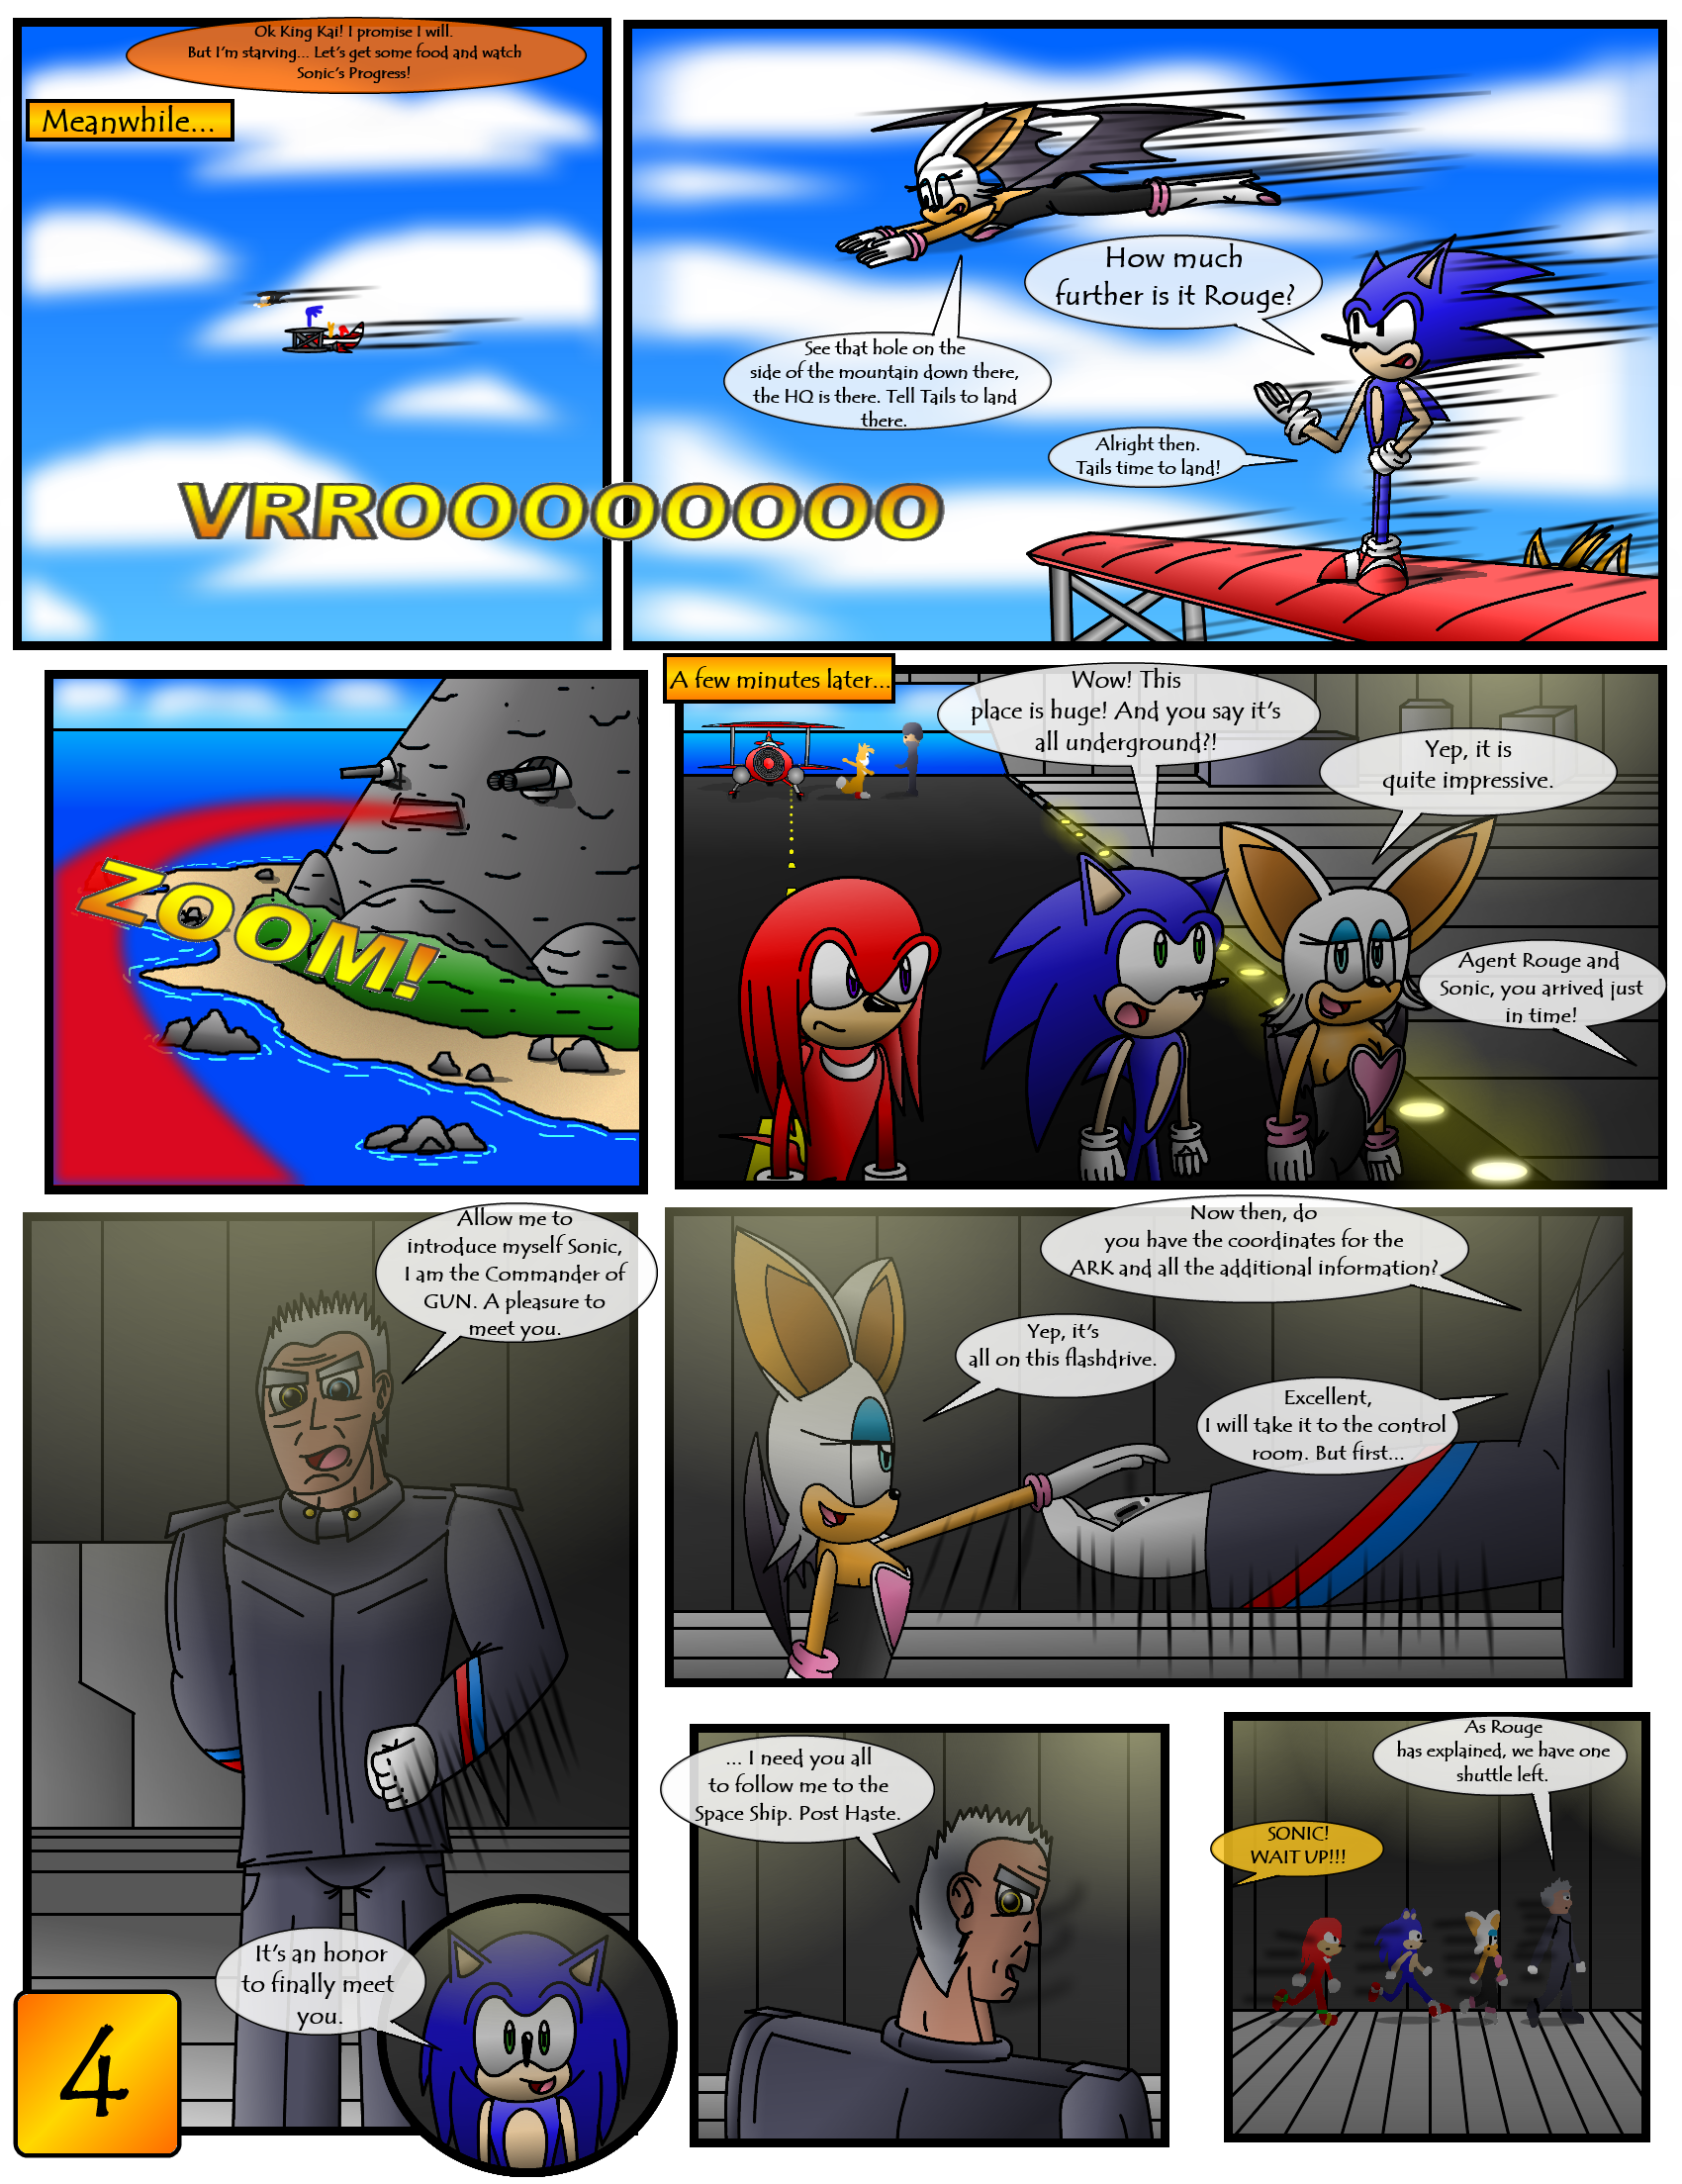 Suzana The Hedgehog (A Sonic Fanfiction) - chapter 4: The battle